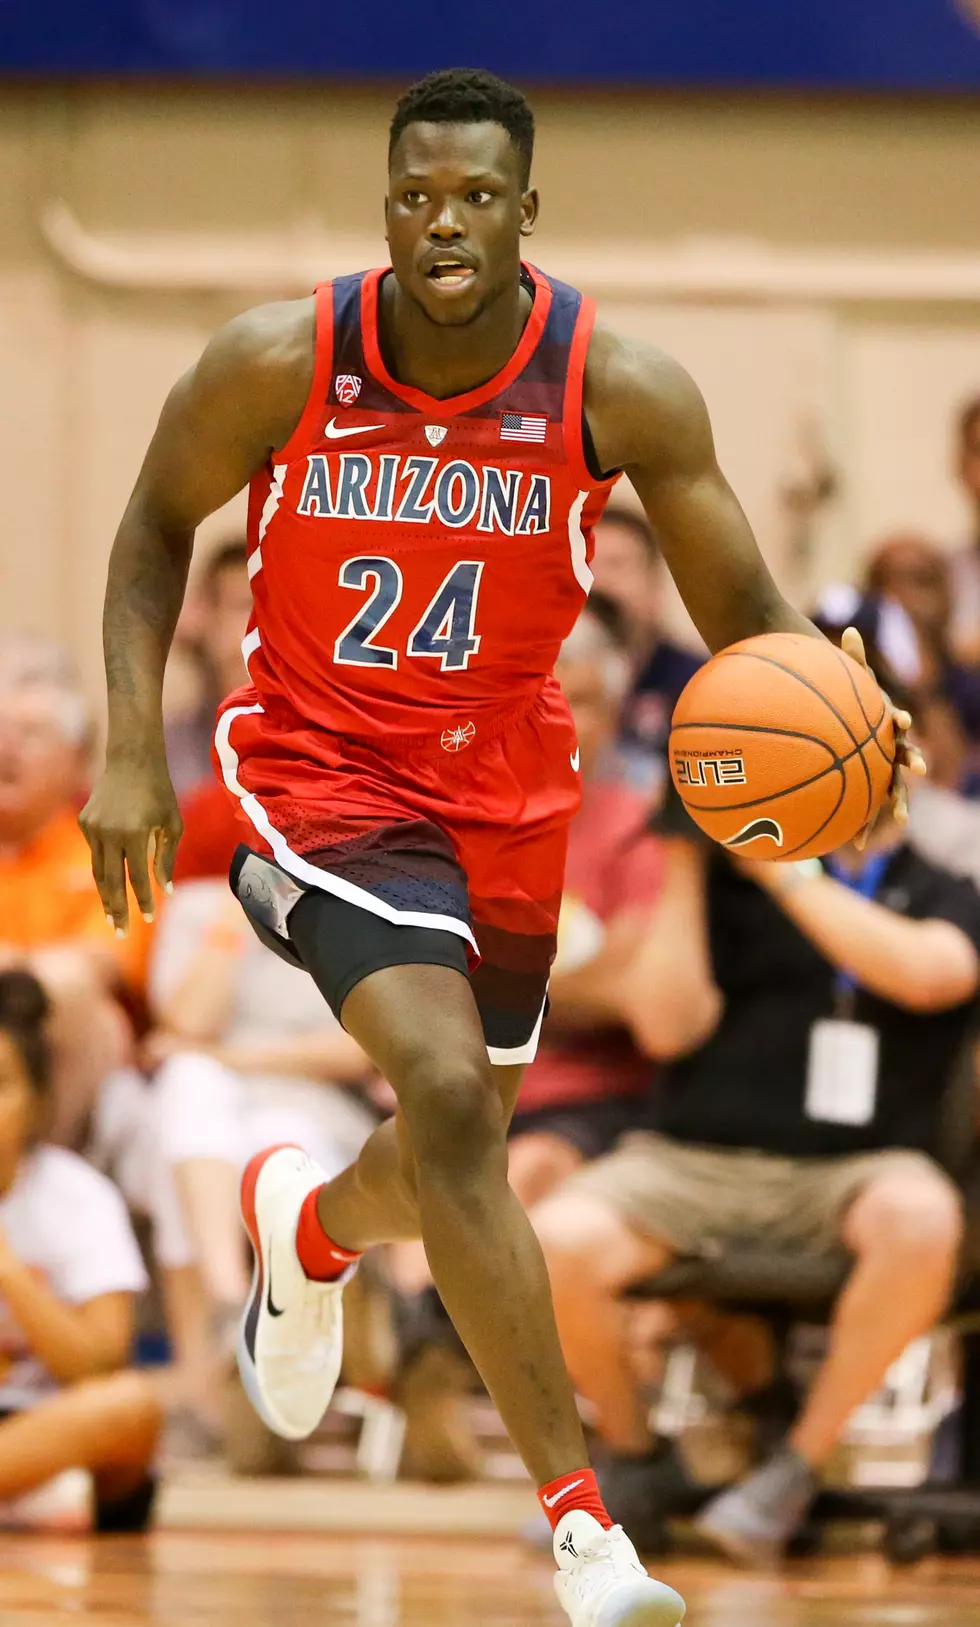 Boise State Adds Akot to Future Basketball Roster